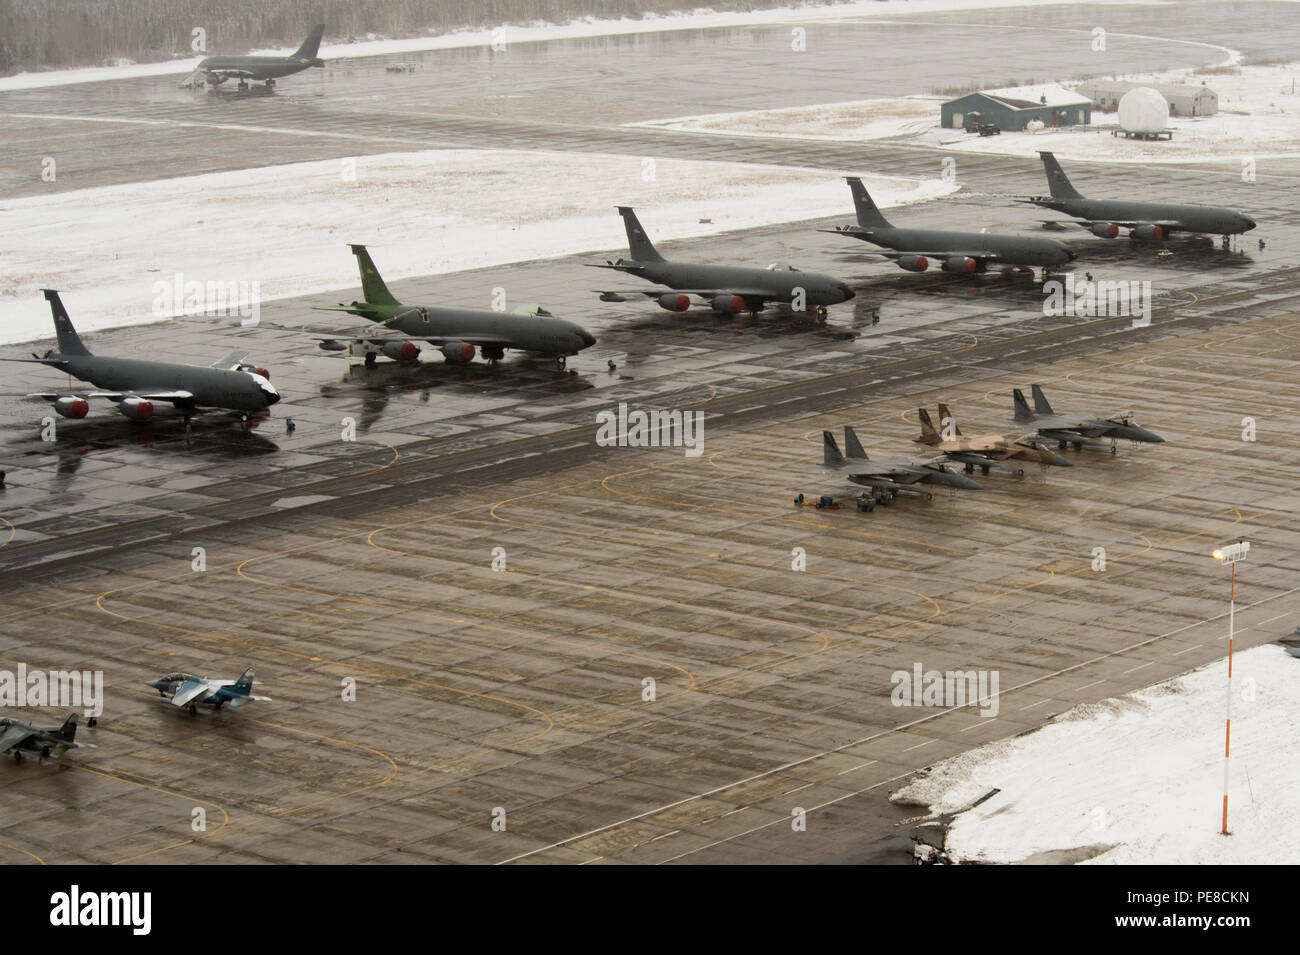 Military aircraft sits on the flight line during Vigilant Shield 16 at 5 Wing Goose Bay, Canada, Oct. 23, 2015. From Oct. 15 to 26, 2015, approximately 700 members from the Canadian Armed Forces, the United States Air Force, the United States Navy, and the United States Air National Guard are deploying to Iqualuit, Nunavut, and 5 Wing Goose Bay, Newfoundland and Labrador for Exercise Vigilant Shield 16. (U.S. Air Force photo by Tech. Sgt. Joshua J. Garcia/Released) Stock Photo